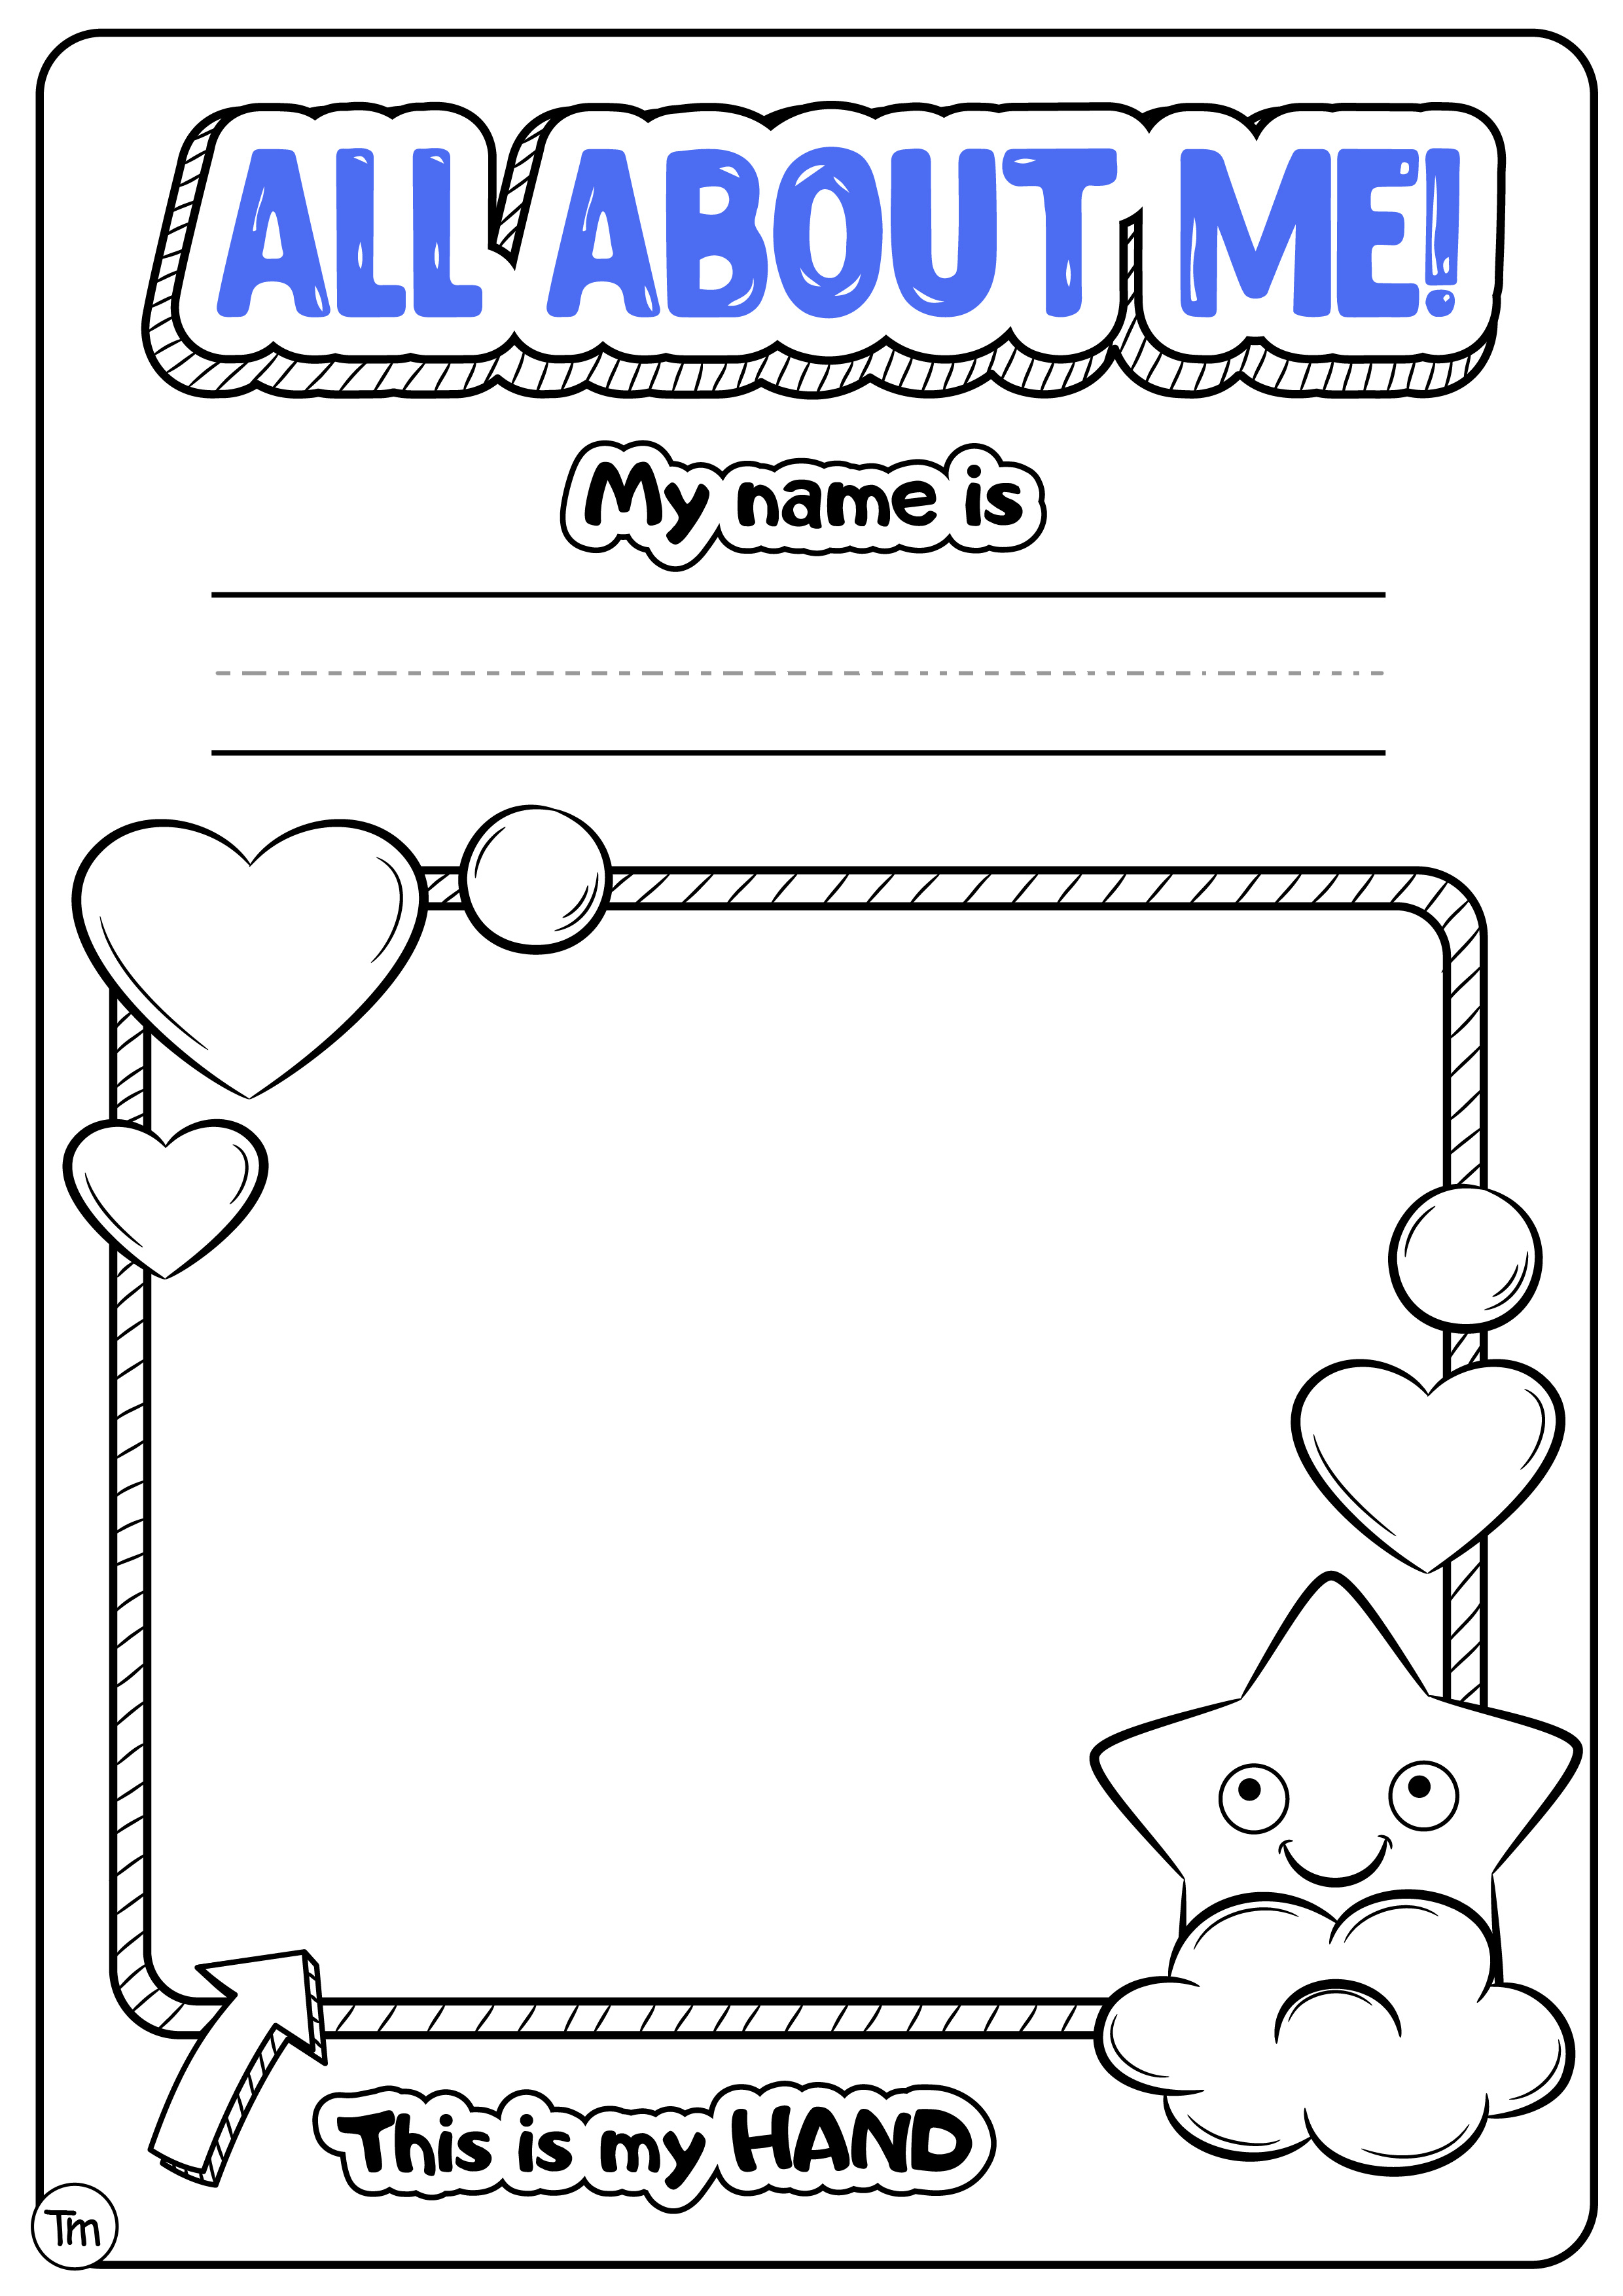 all-about-me-printable-page